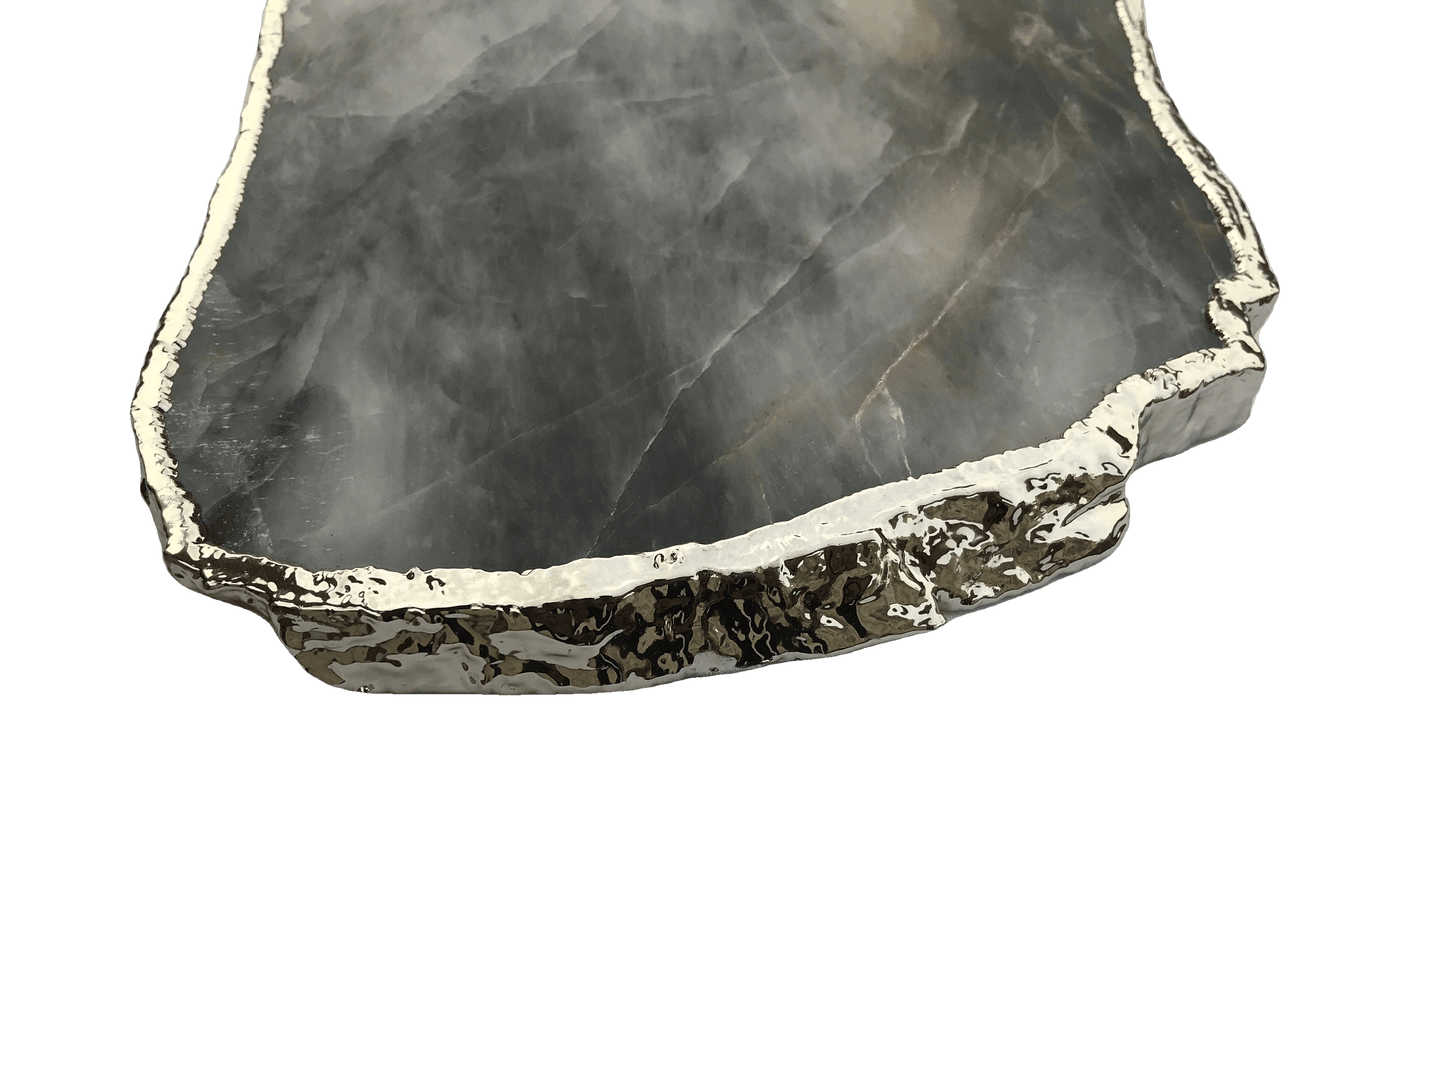 Large Grey Agate Quartz Cheese PlatterTray - MAIA HOMES